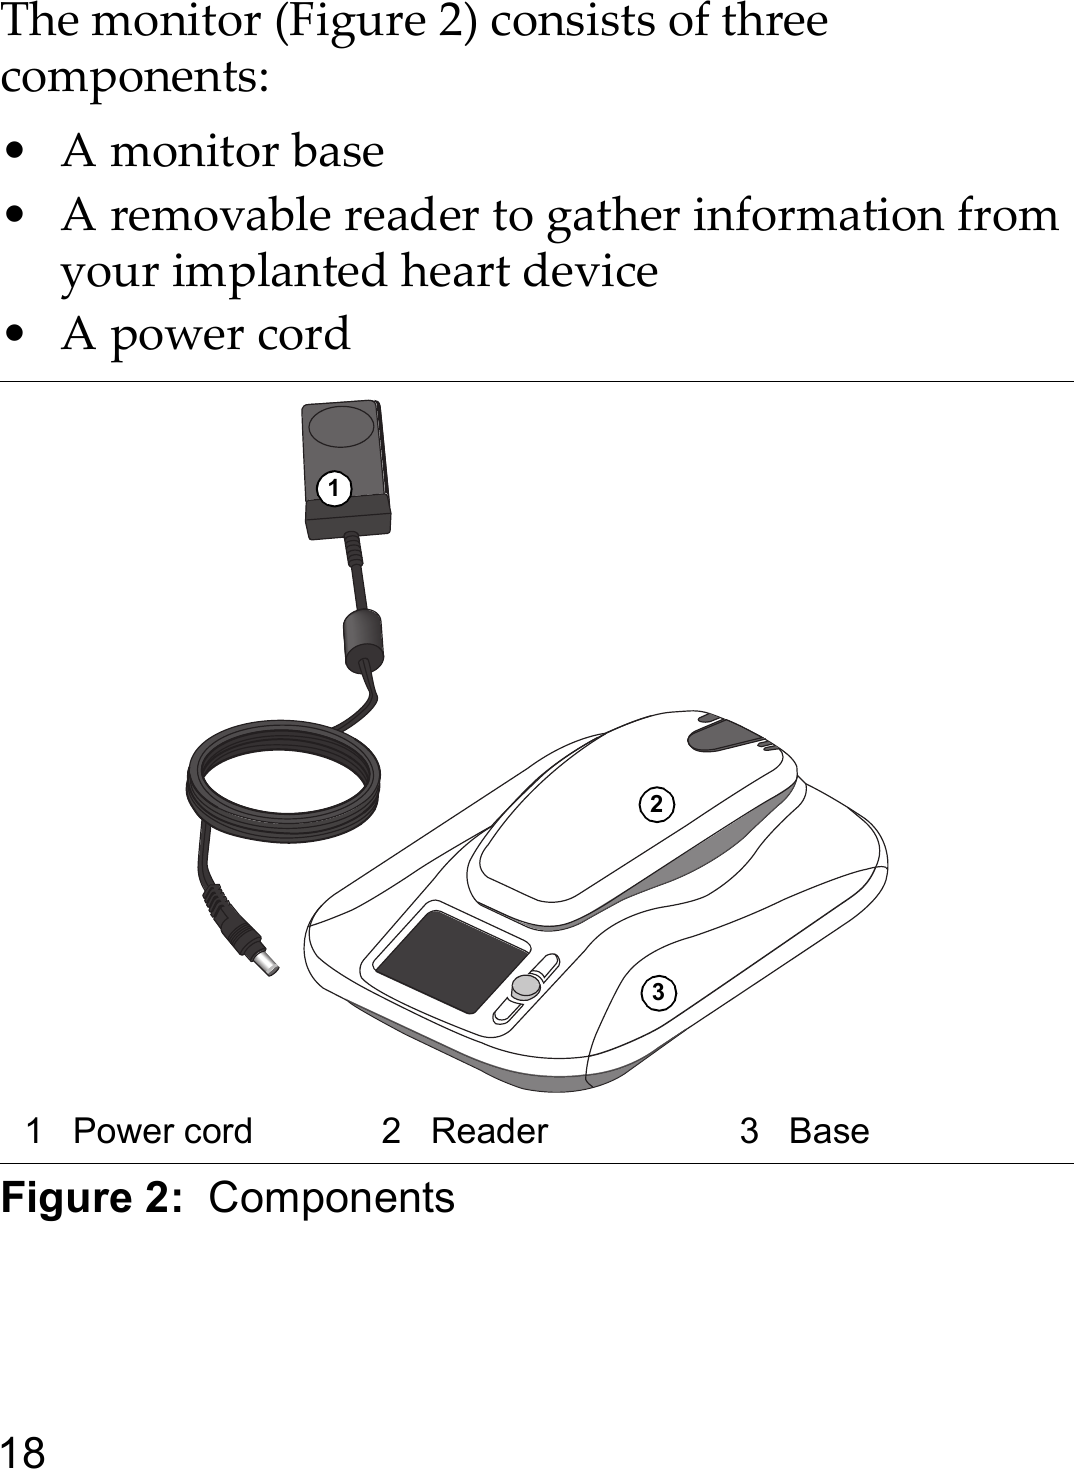 18The monitor (Figure 2) consists of three components:•A monitor base• A removable reader to gather information from your implanted heart device•A power cordFigure 2:  Components 1 Power cord 2 Reader 3 Base123